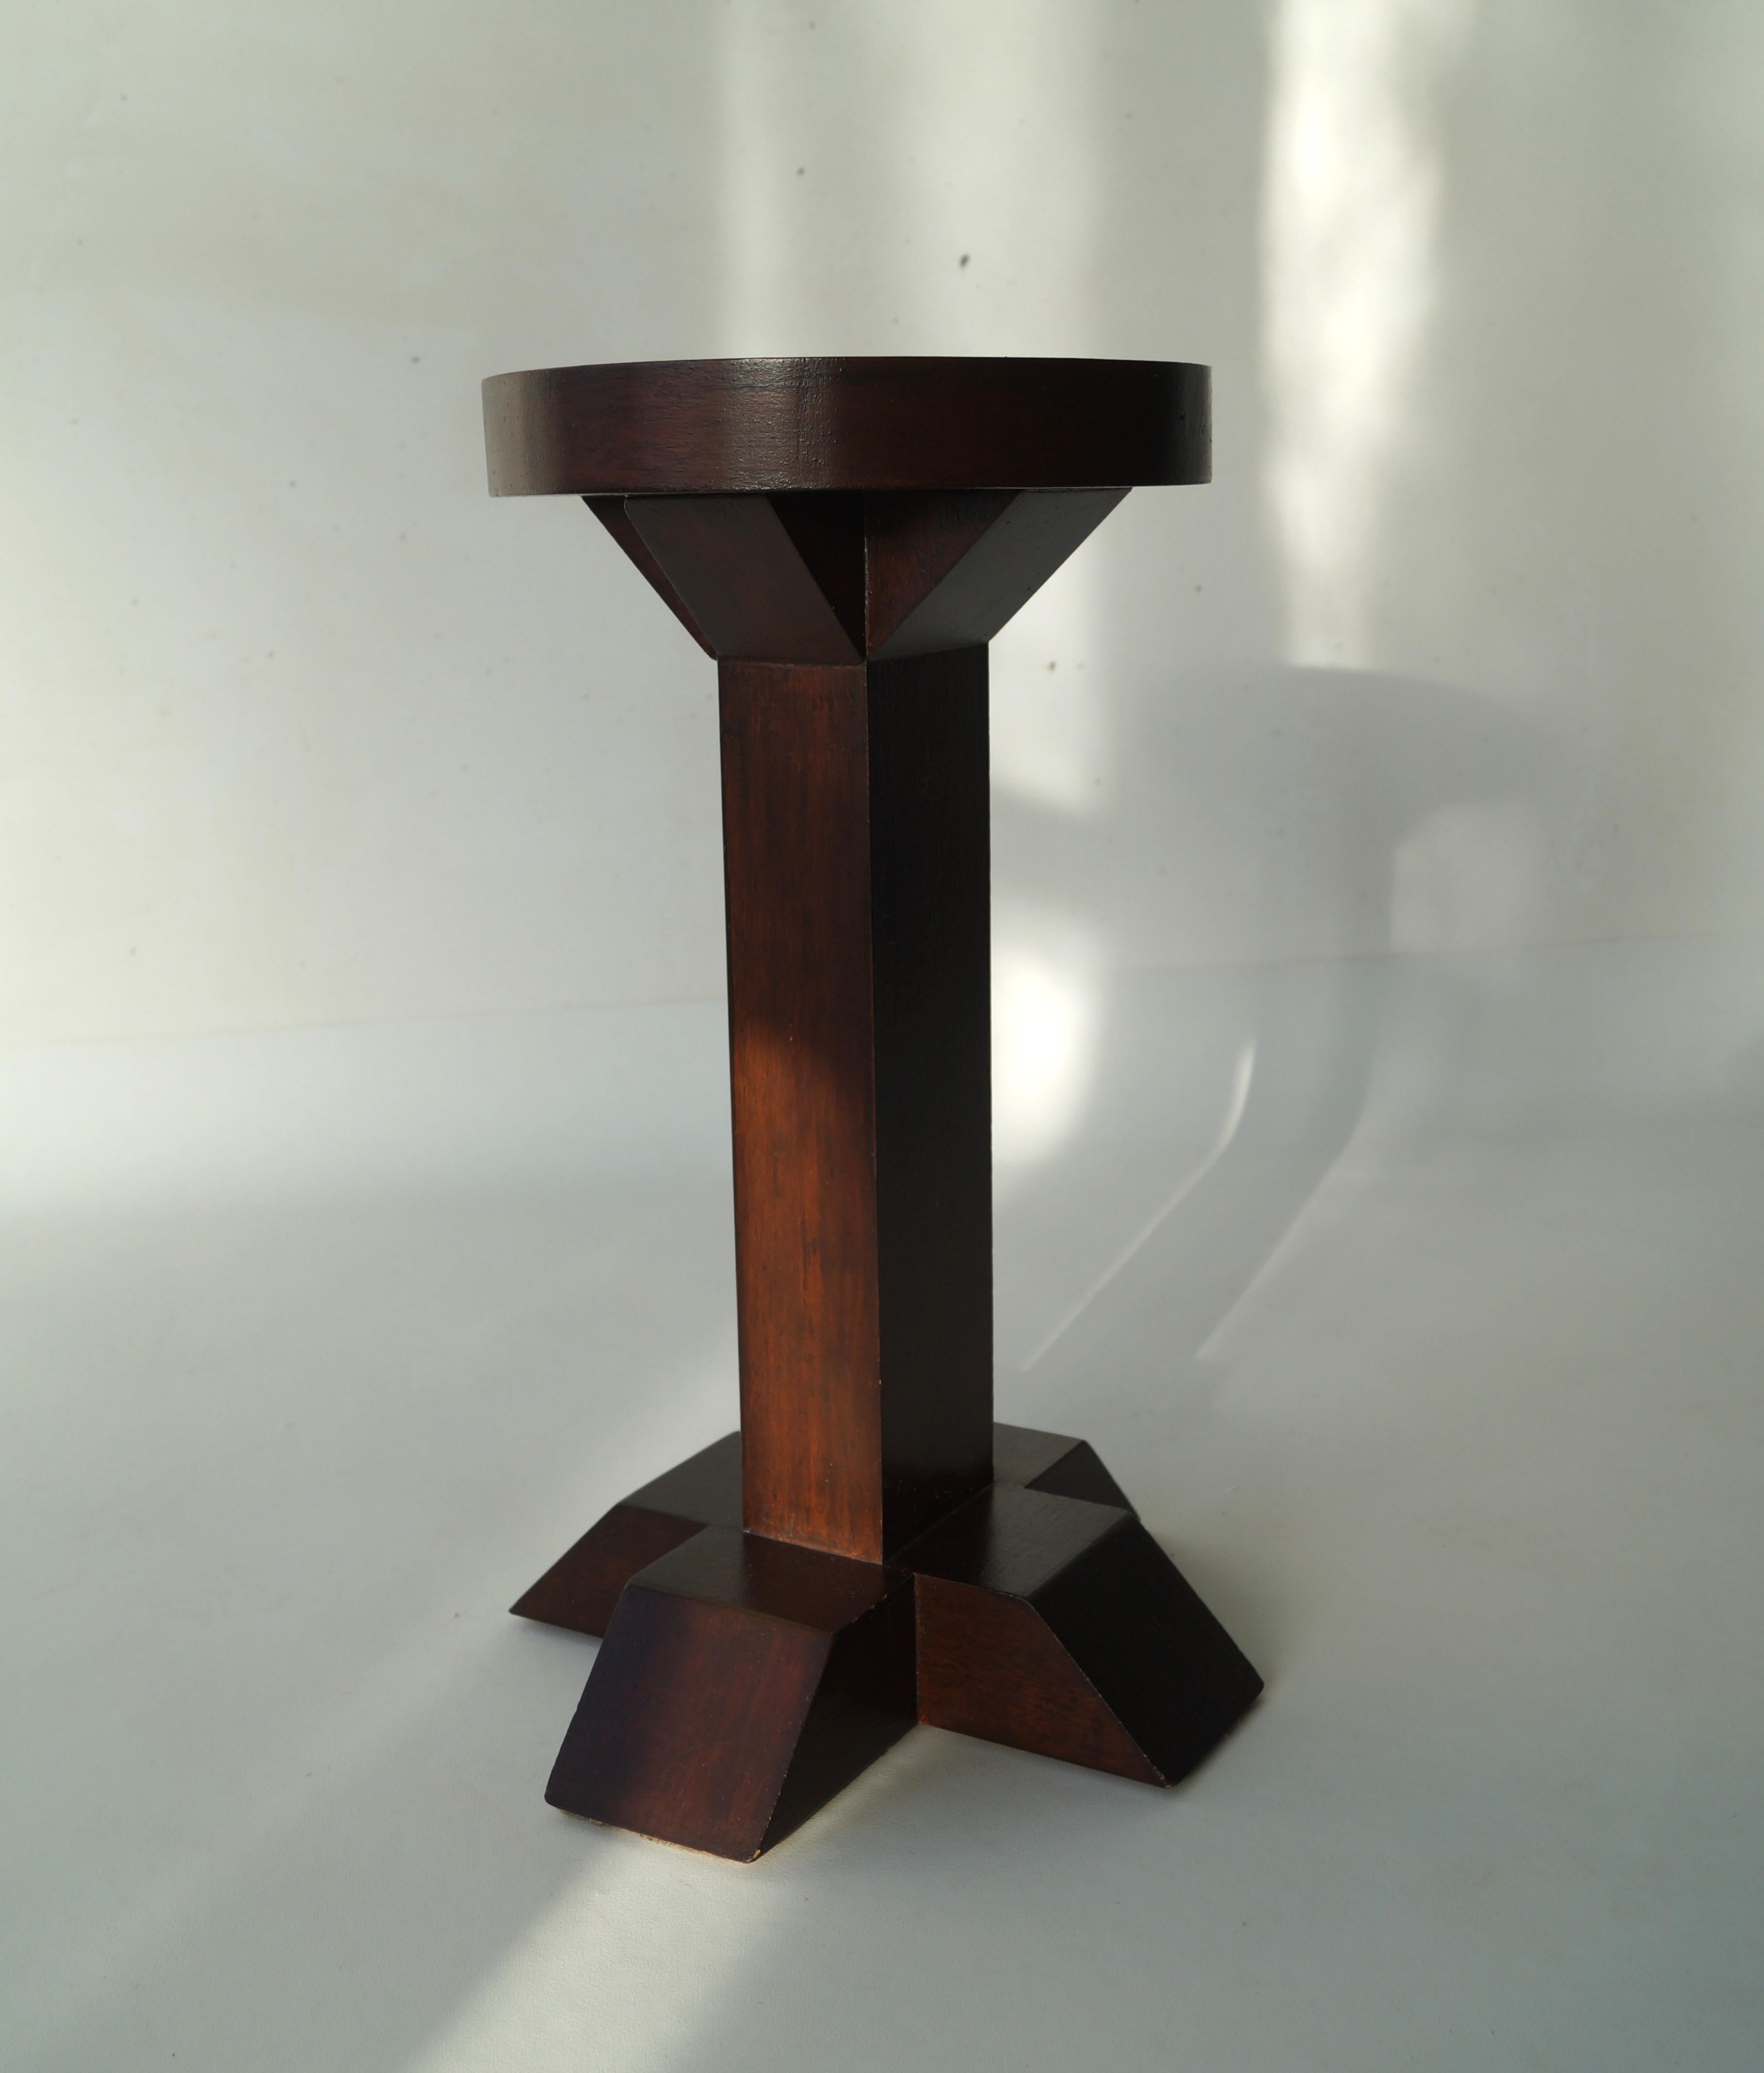 A rare Dutch brutalist 1960s-70s plinth or pedestal with a bold, modernist design. We are currently investigating its designer. The design is reminiscent of the Bossche School (famous architects a.o. Dom Hans van der Laan & Jan de Jong)

It is quite